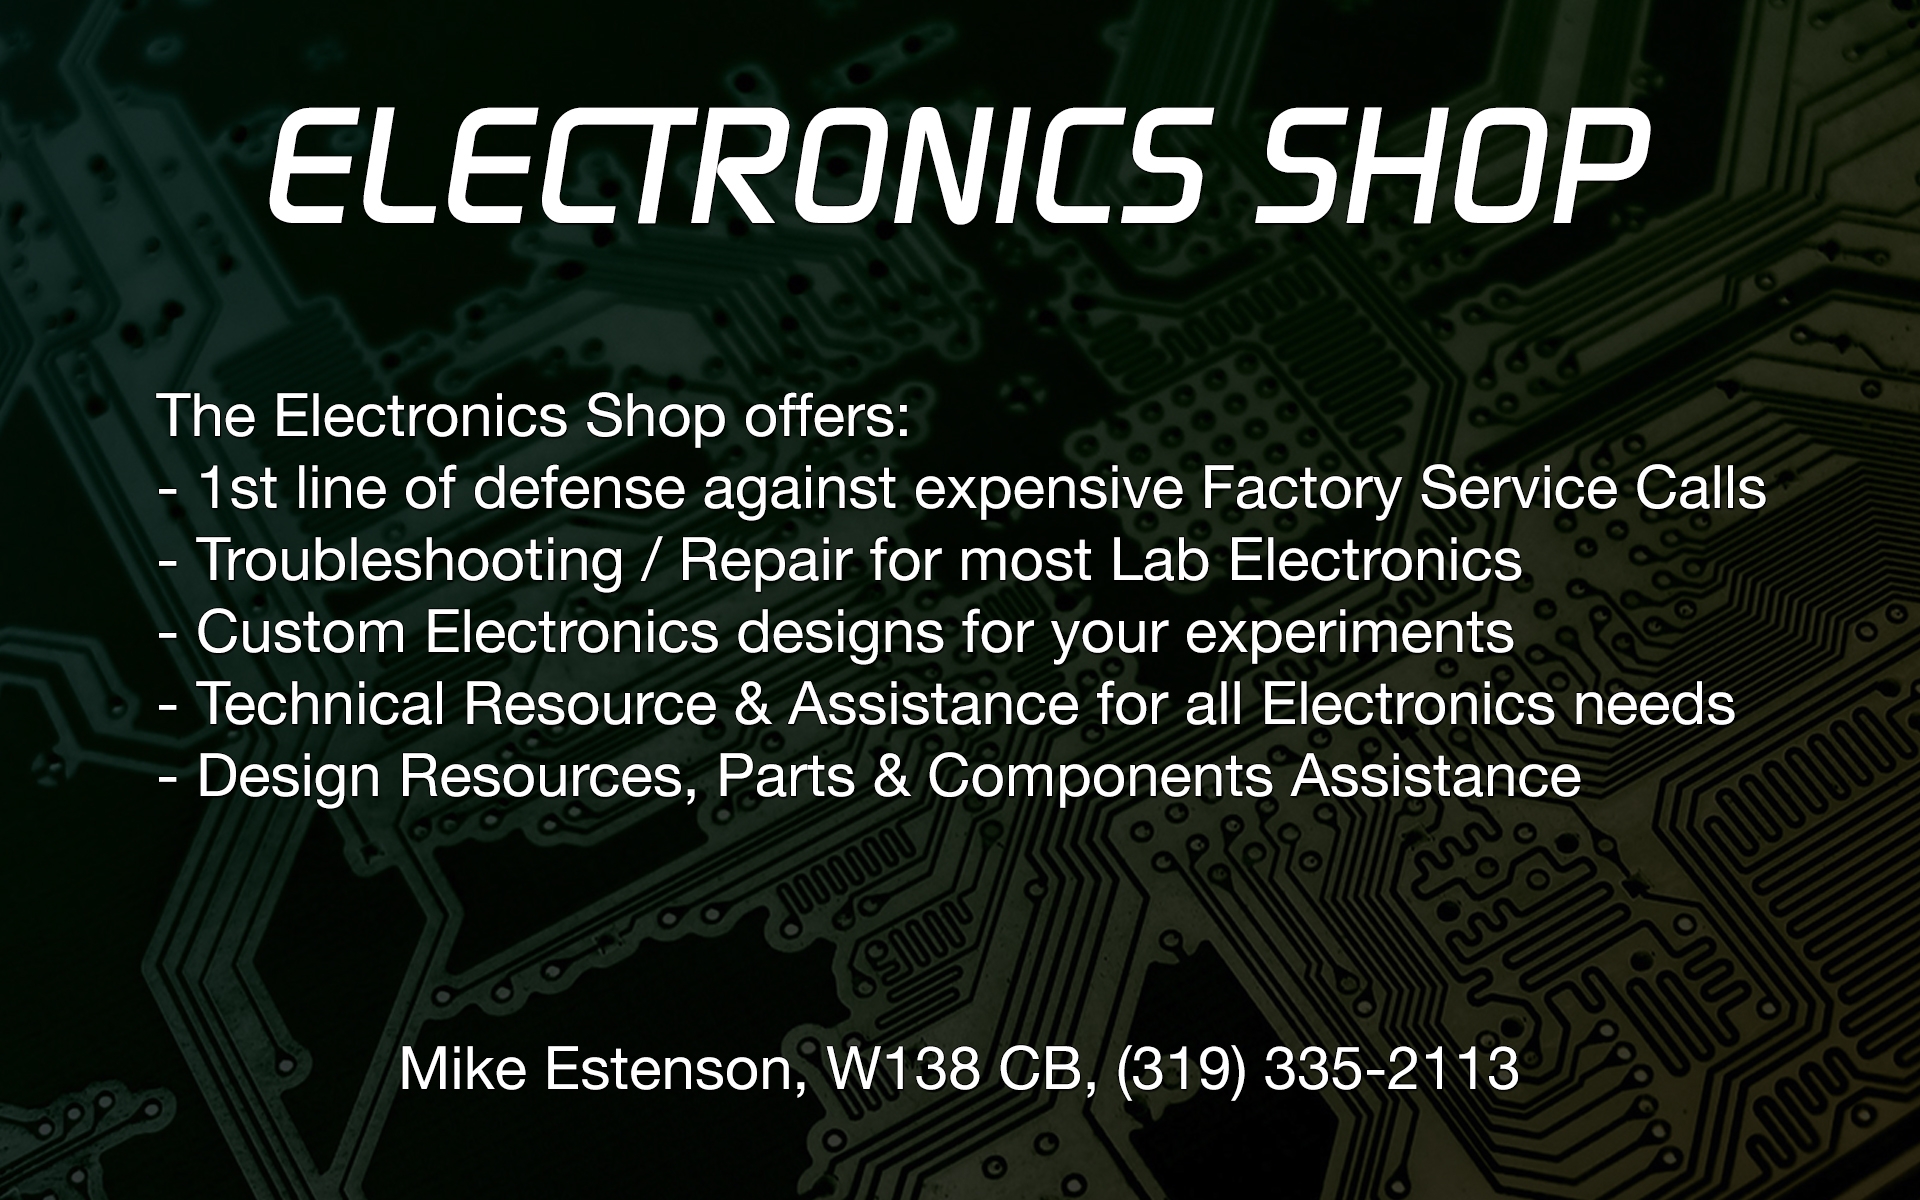 The Electronics Shop offers; 1st line of defense against expensive Factory Service Calls, Troubleshooting and Repair for most Lab Electronics, Custom Electronics designs for your experiments, Technical Resource and Assistance for all Electronics needs, and Design Resources, Prats and Components Assistance. Contact Mike Estenson, W138 CB, (319) 335-2113